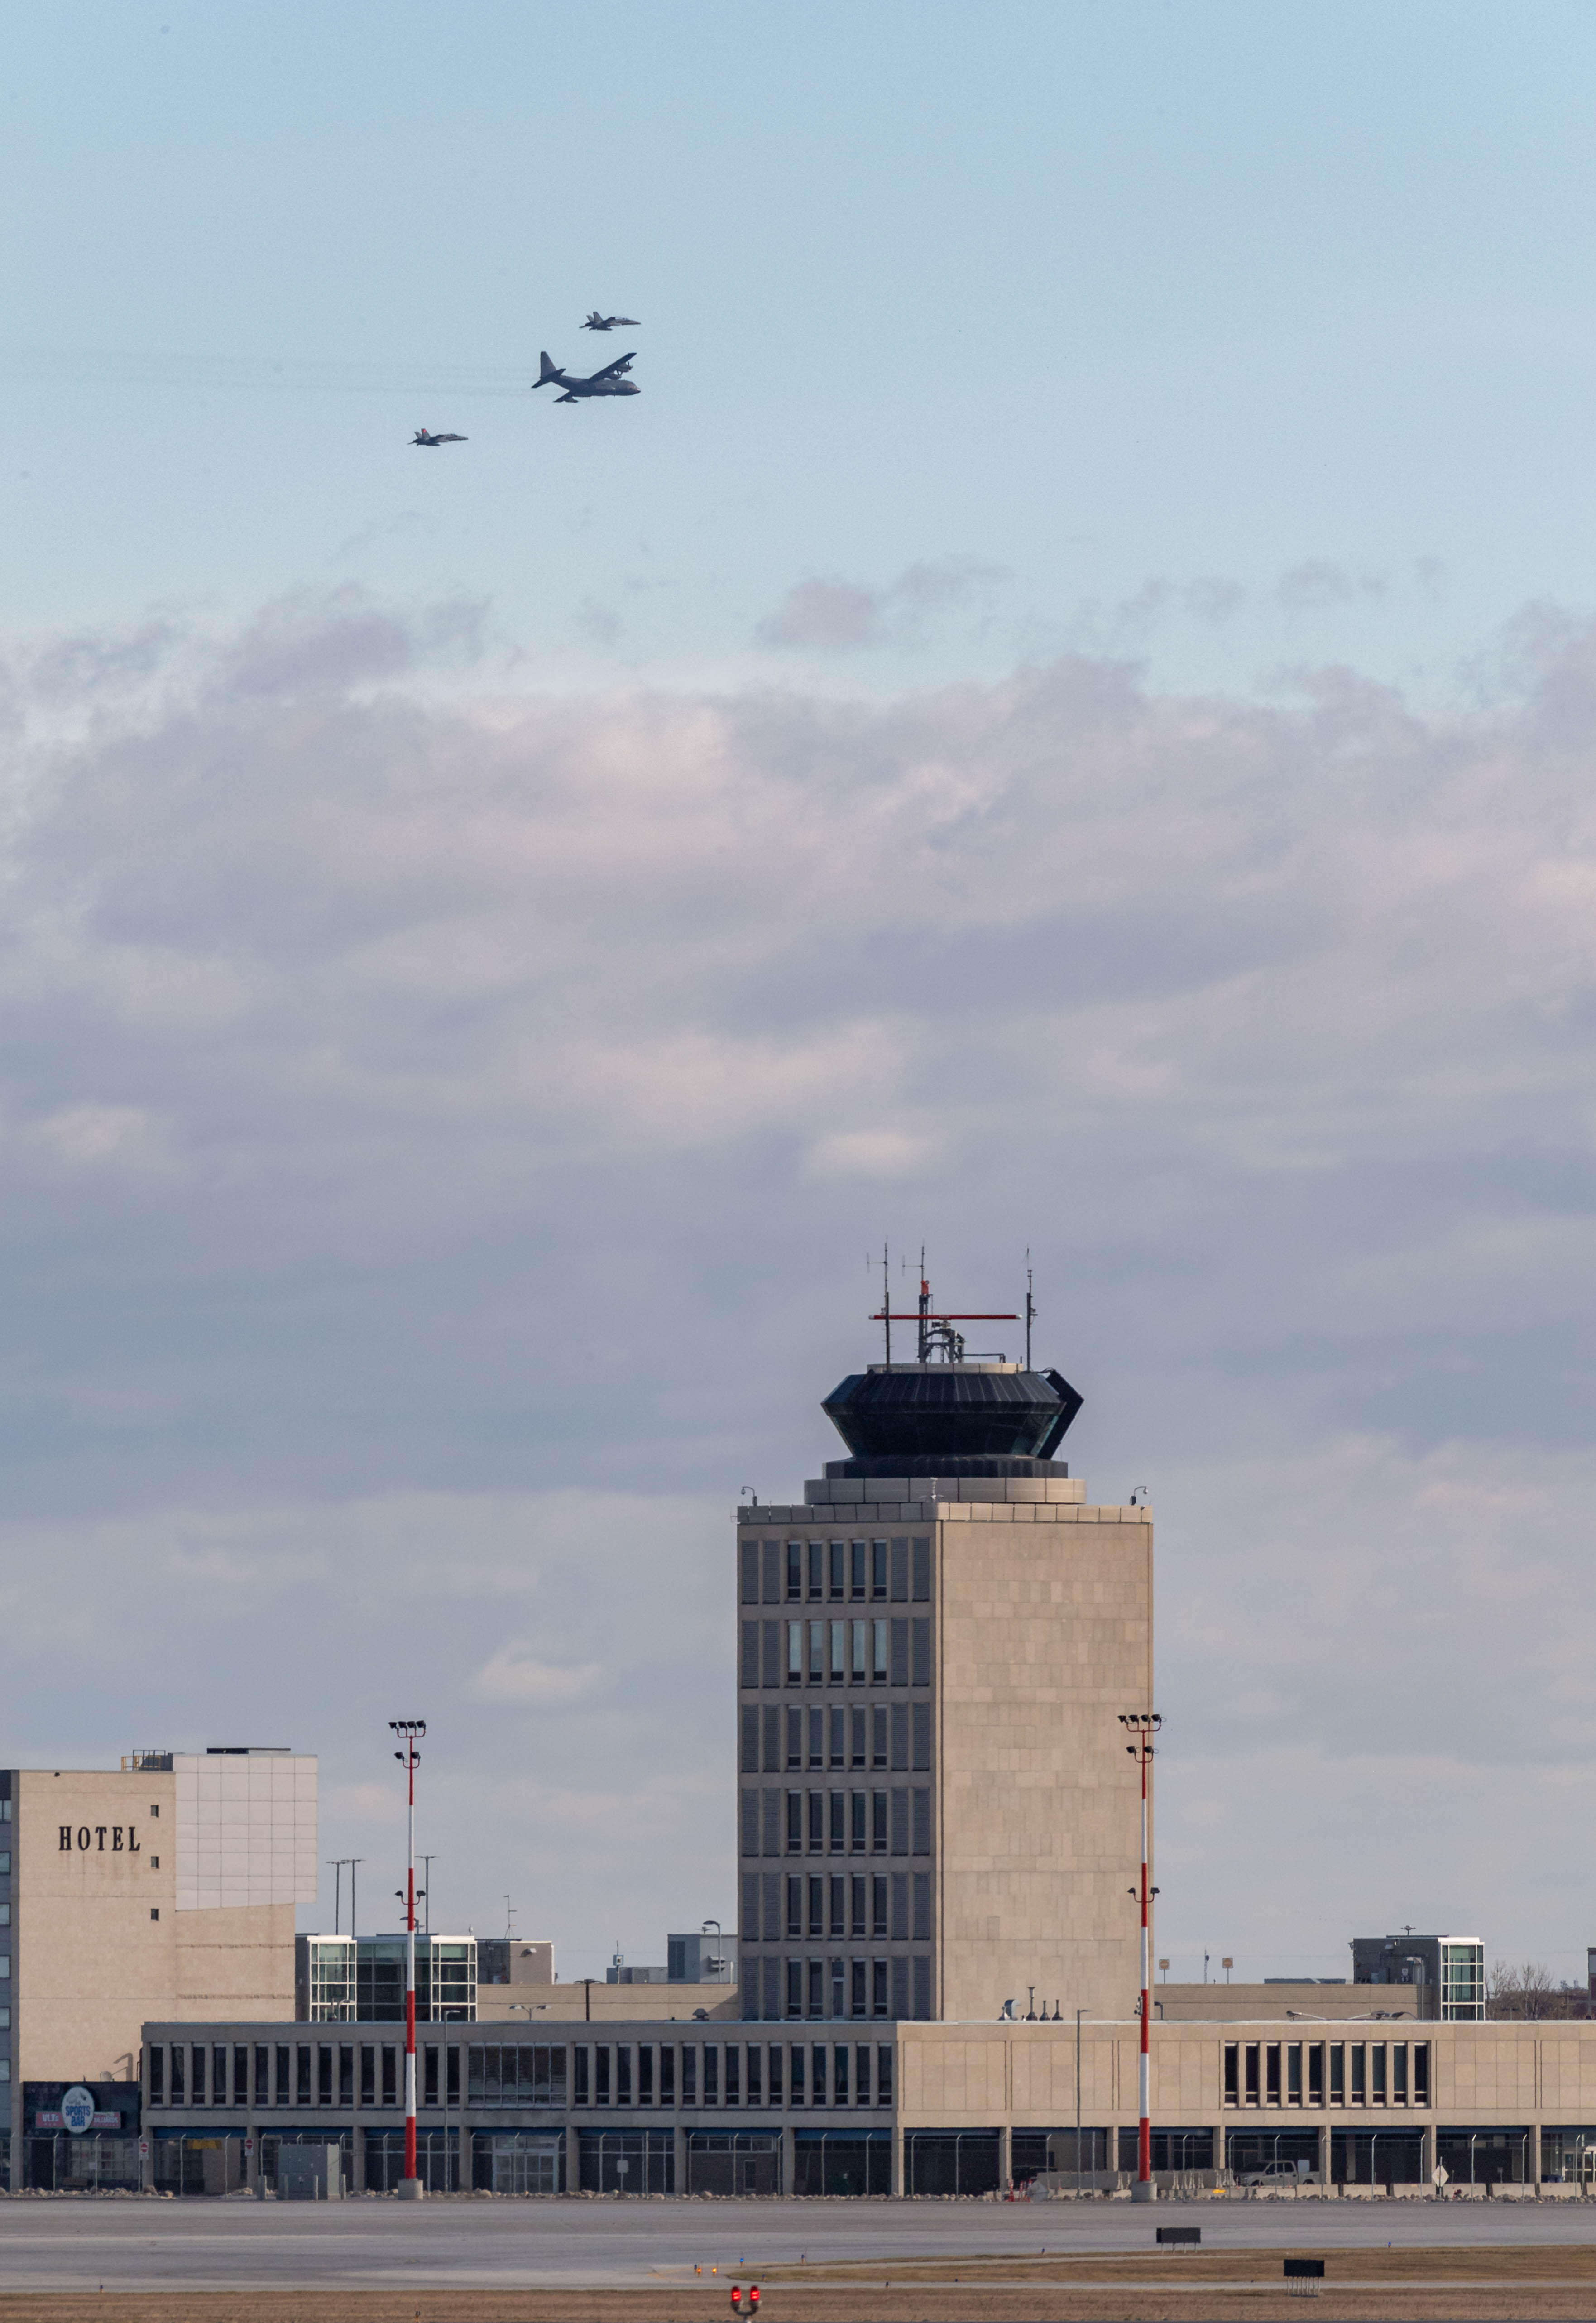 A CC-130 Hercules aircraft flies in formation with two CF-188 Hornet fighter aircraft over the Winnipeg on October 13, 2020, to mark the 60th year of service of the aircraft in the Royal Canadian Air Force. PHOTO: Corporal Darryl Hepner